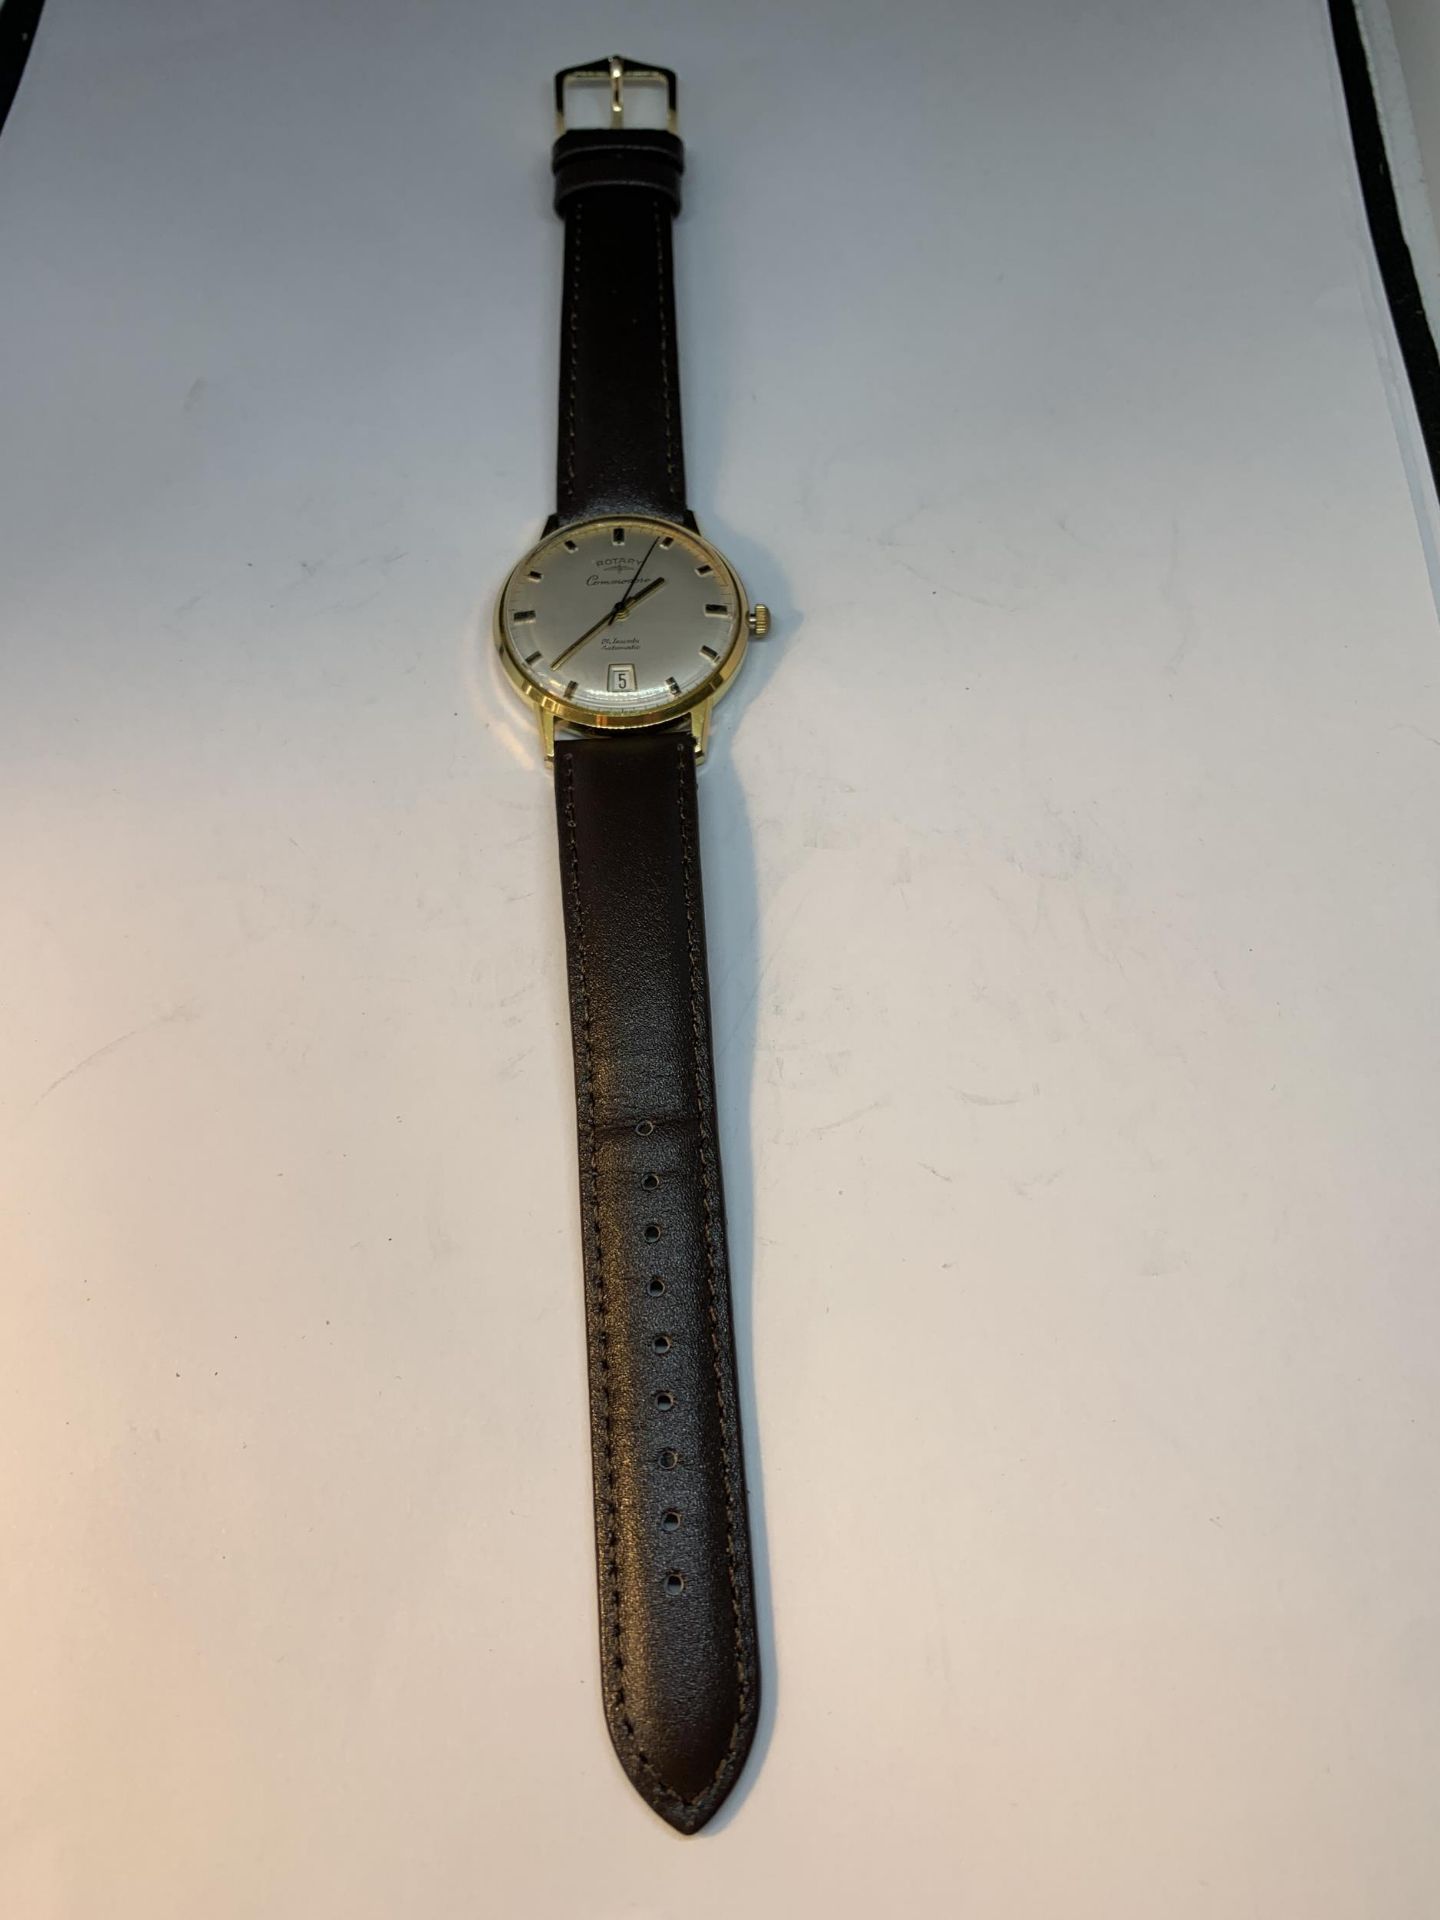 A VINTAGE ROTARY COMMODORE 21 JEWELS AUTOMATIC WRIST WATCH WITH BROWN LEATHER STRAP SEEN WORKING BUT